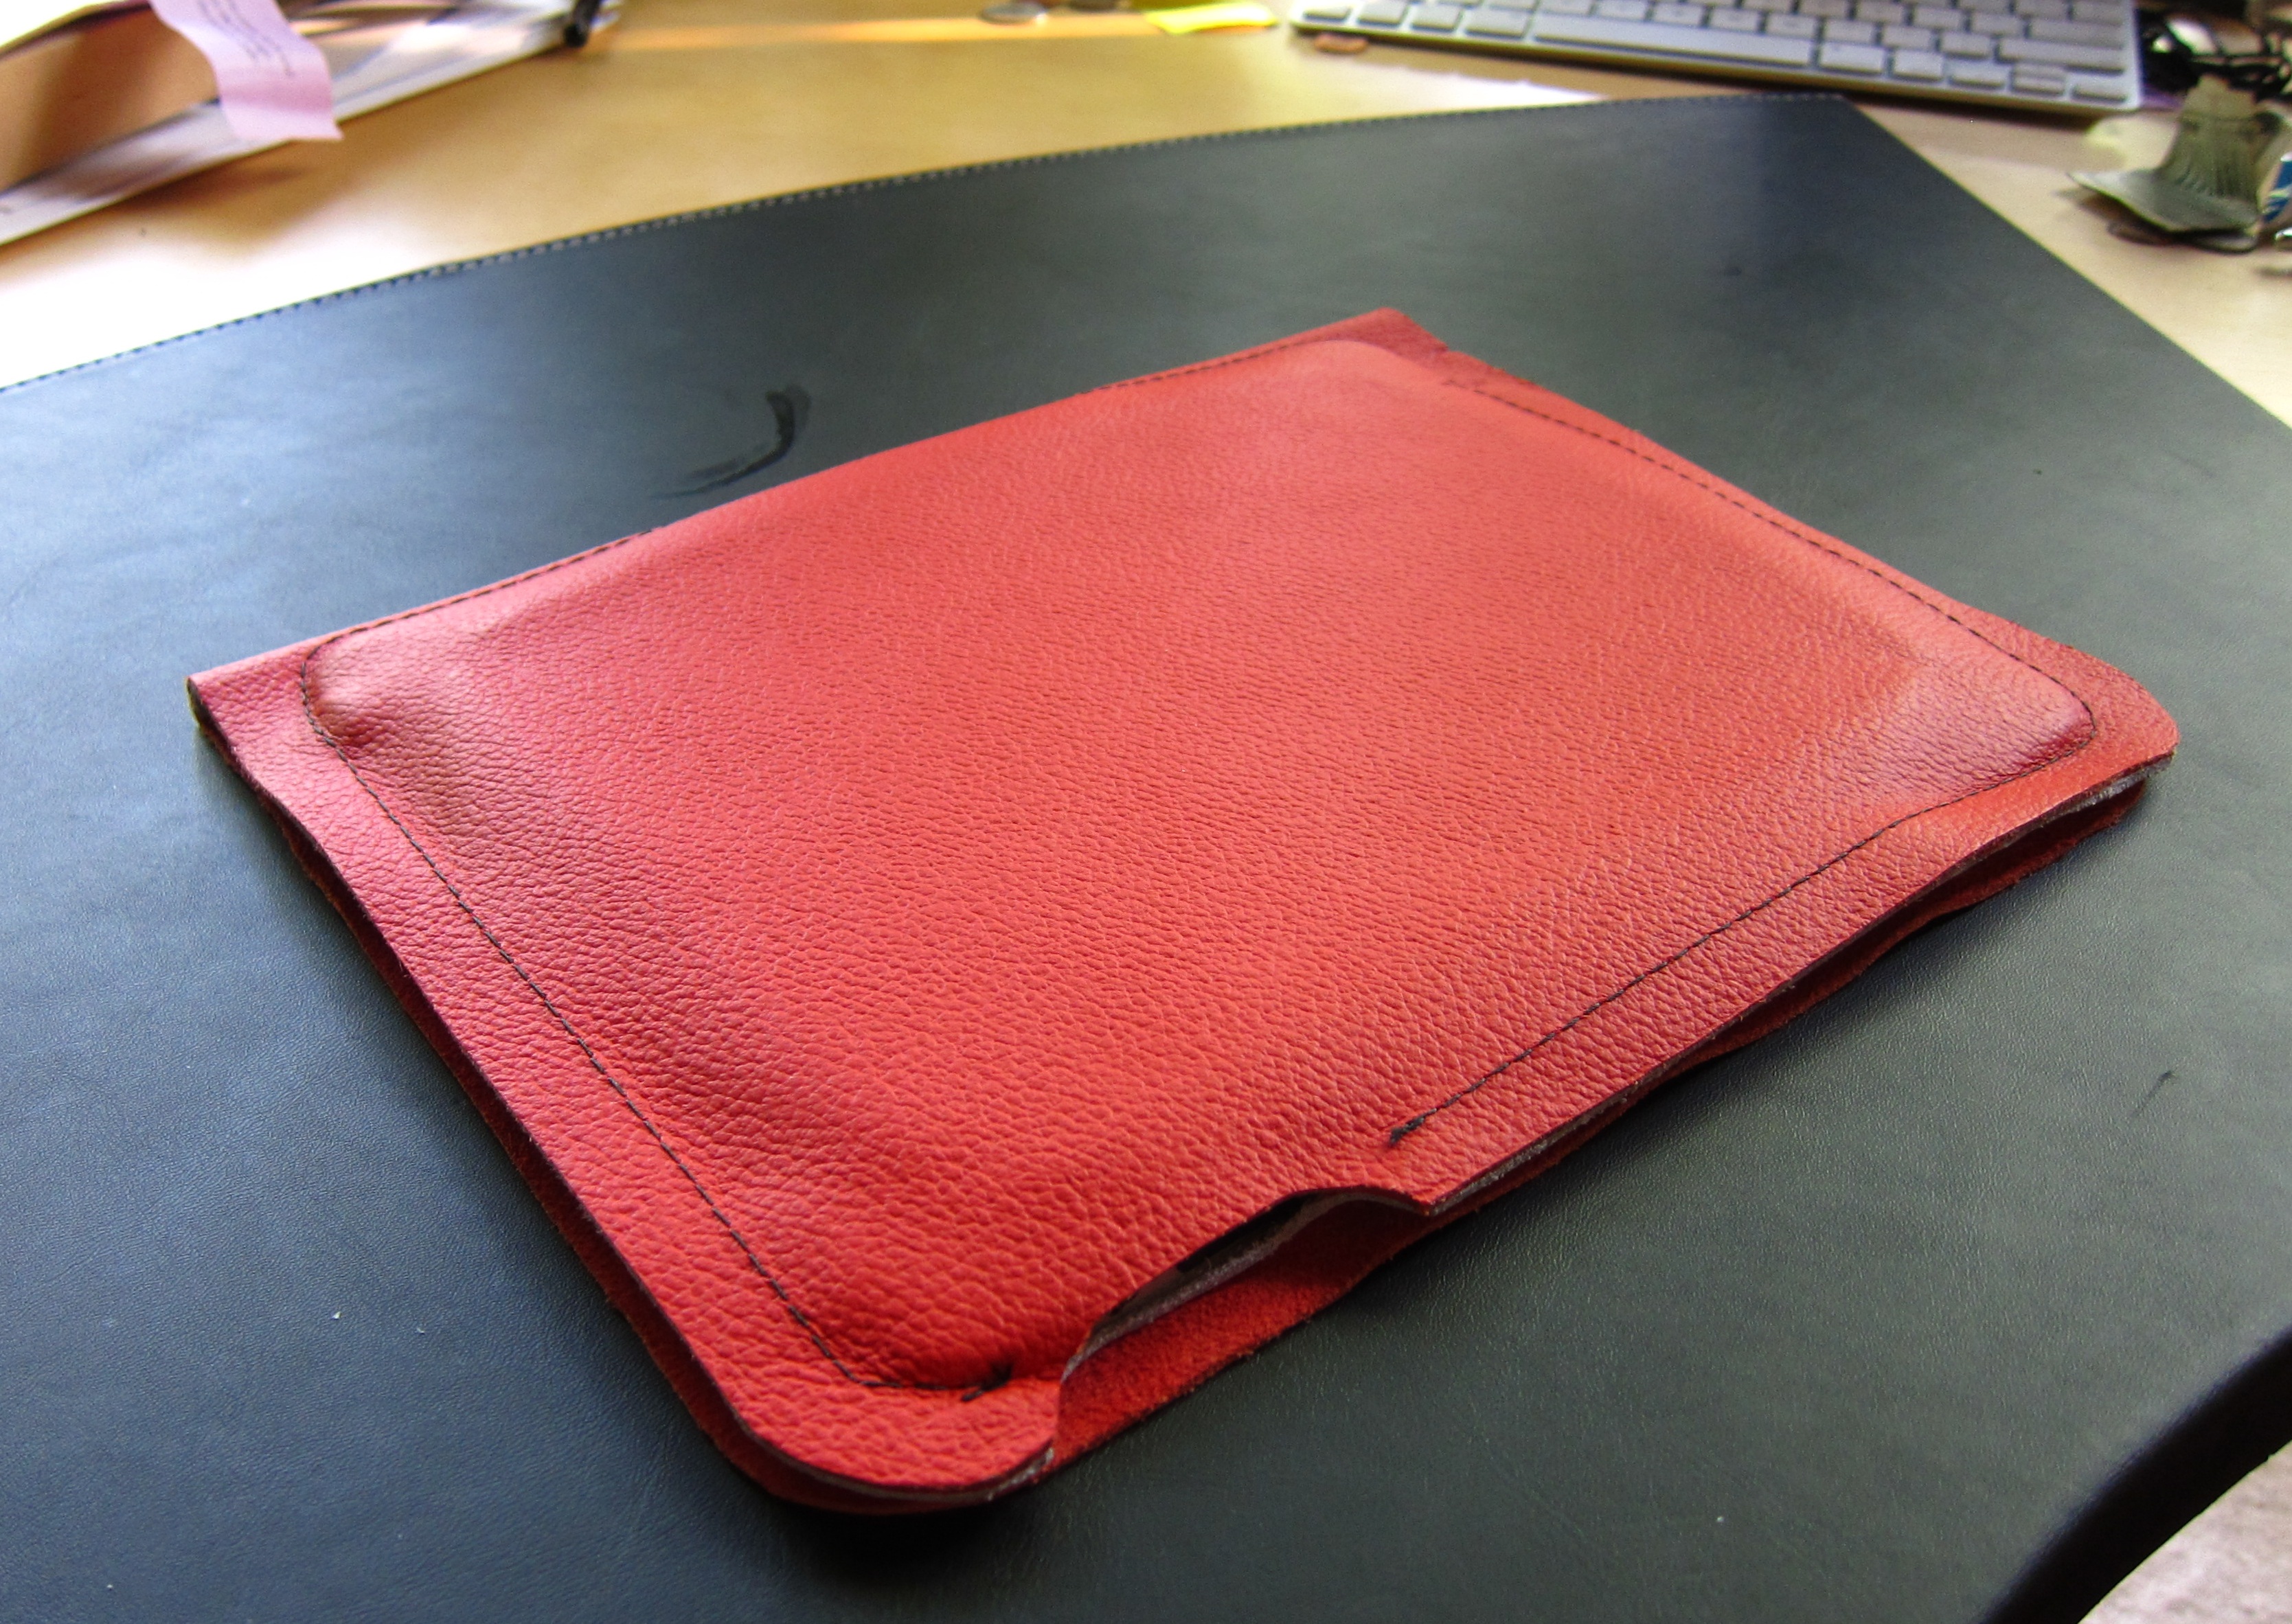 Xxxsssww - Custom leather case designed and made for the iPad.